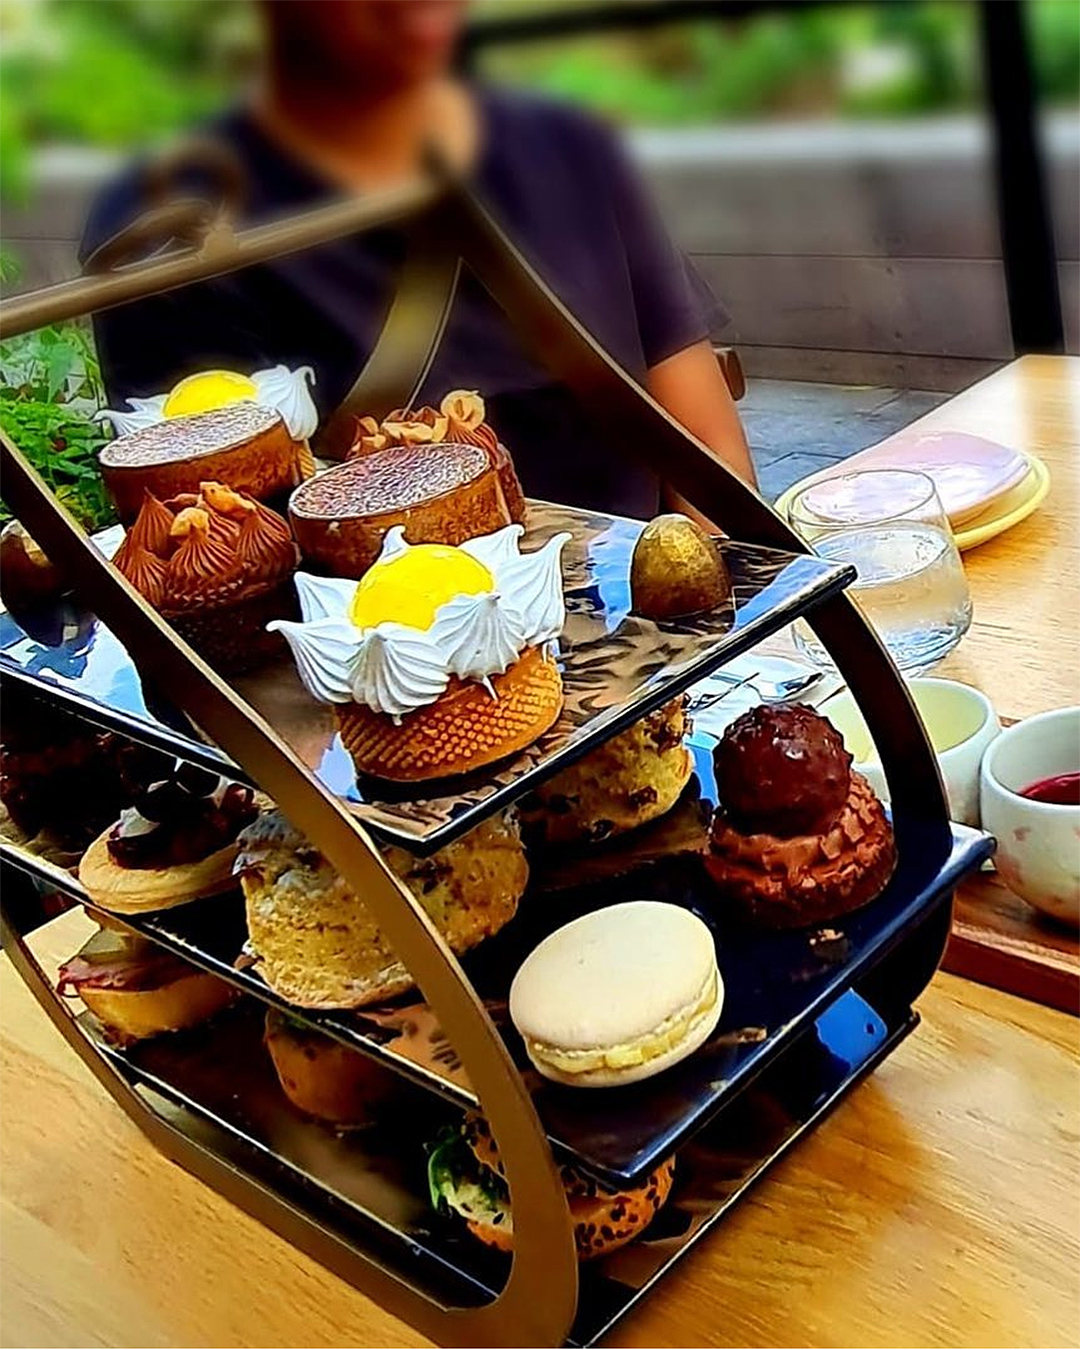 The delicious afternoon tea at Miann Chocolate Factory.